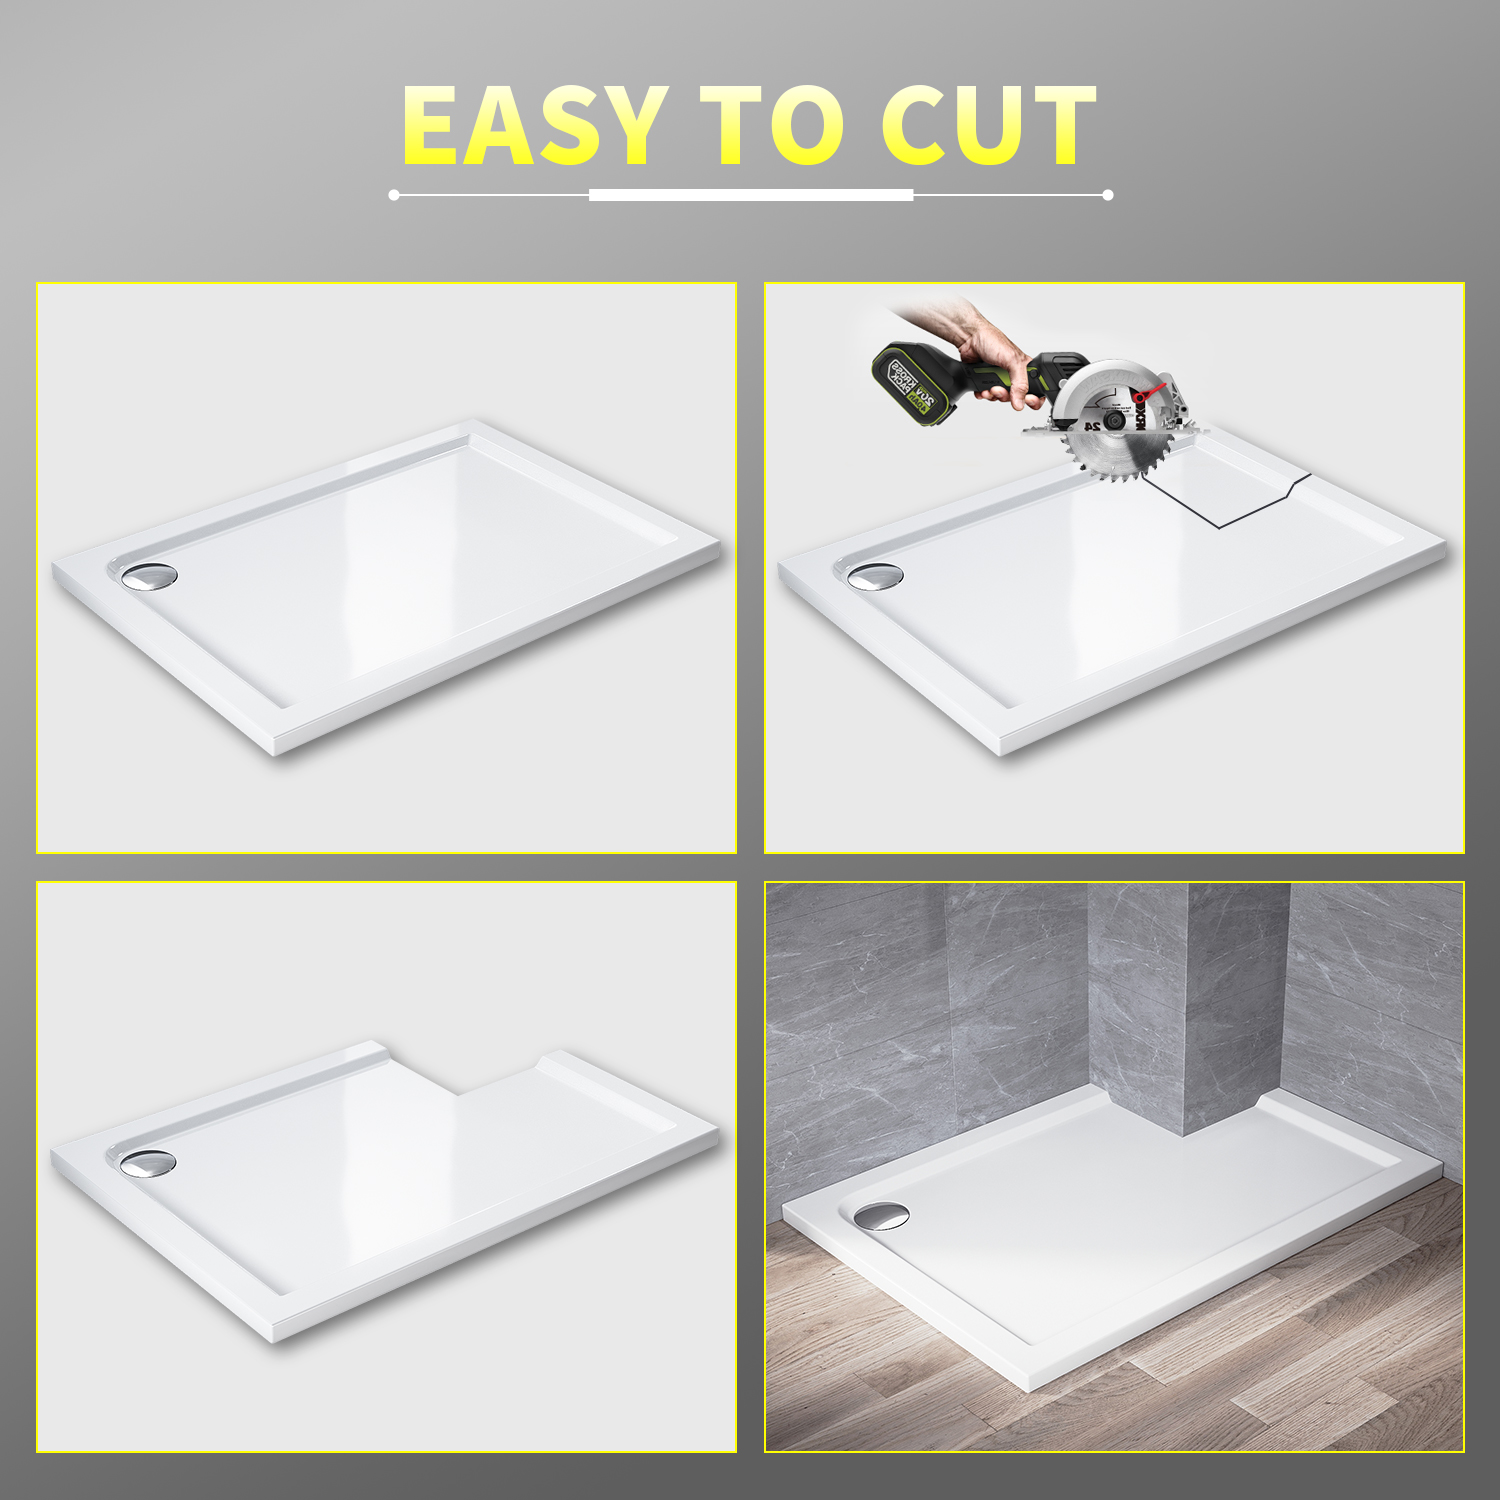 Square Shower Tray Features: